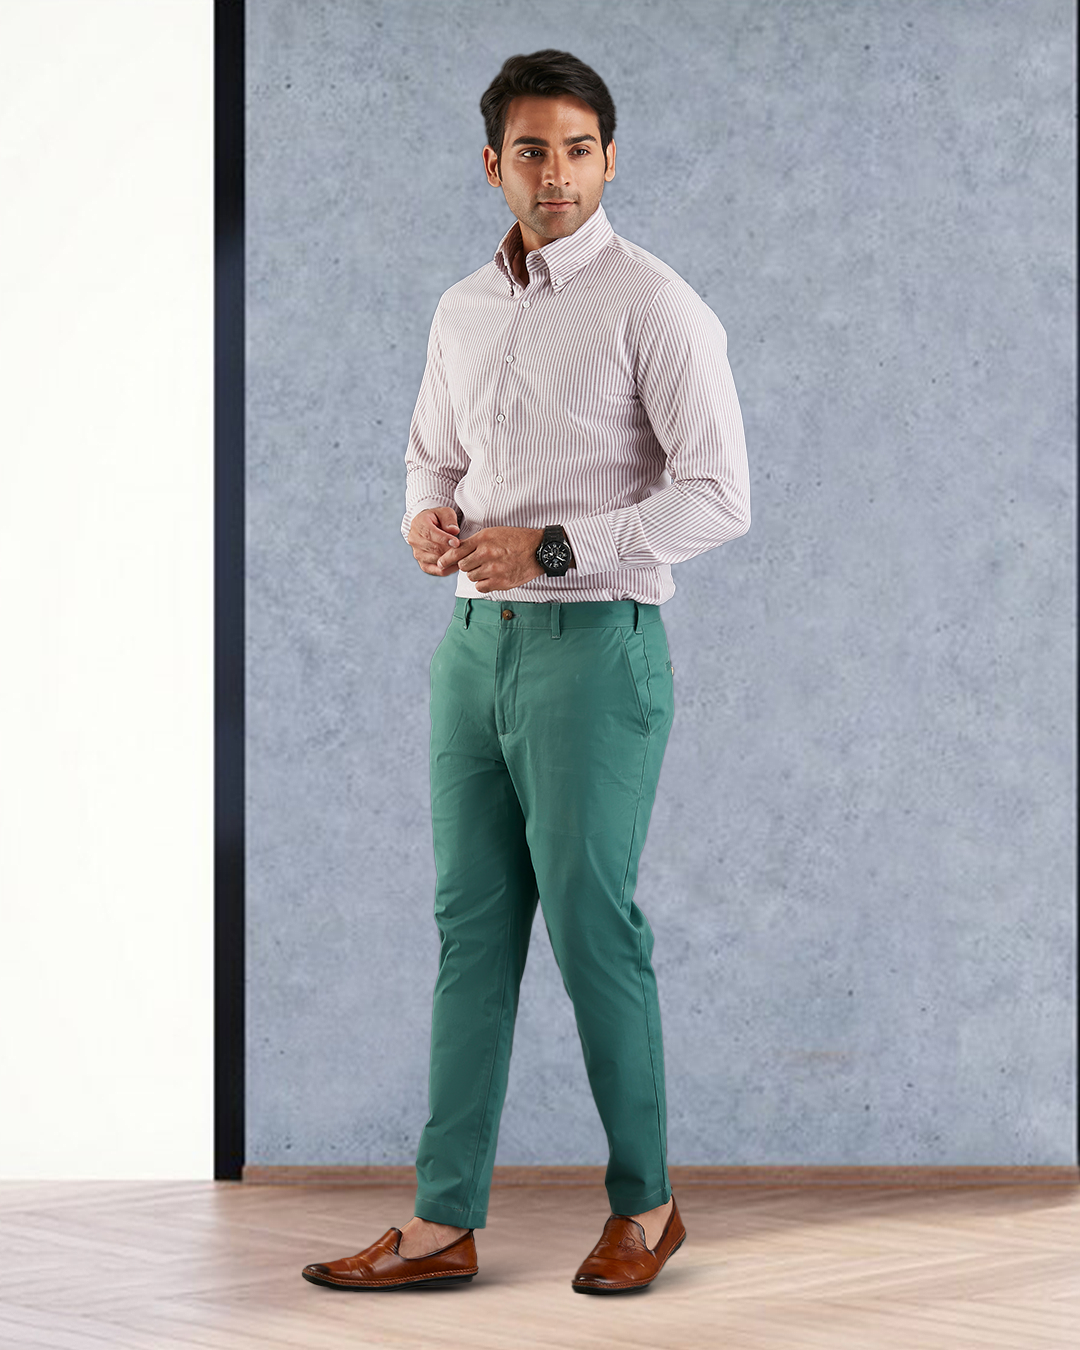 Model wearing custom Genoa Chino pants for men by Luxire in fern green hands together